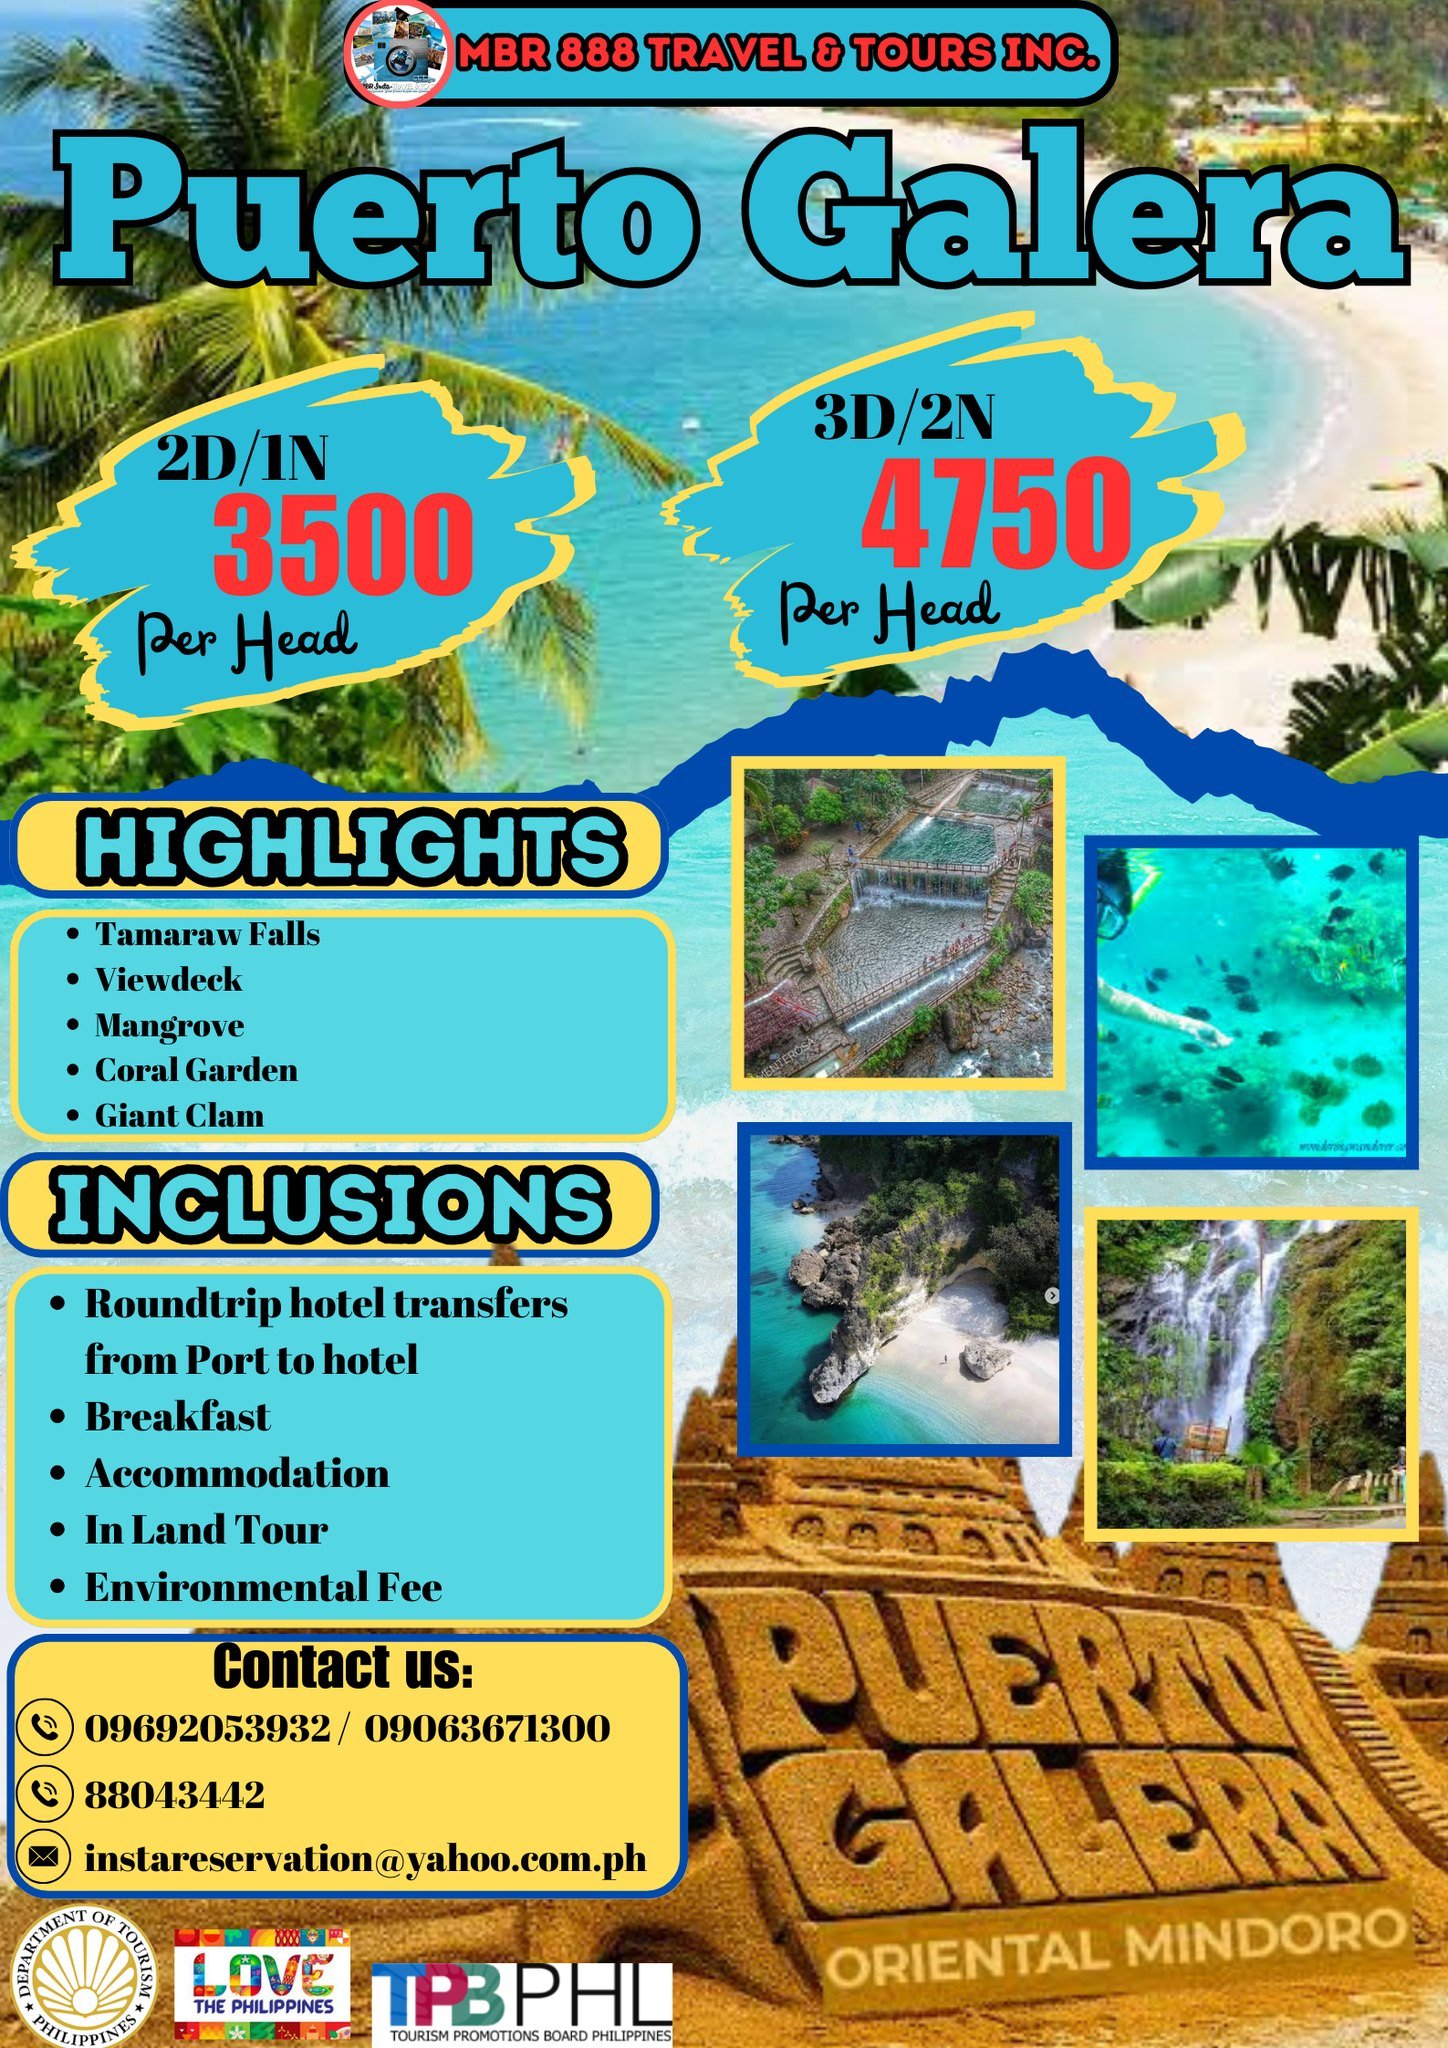 mbr 888 travel and tours